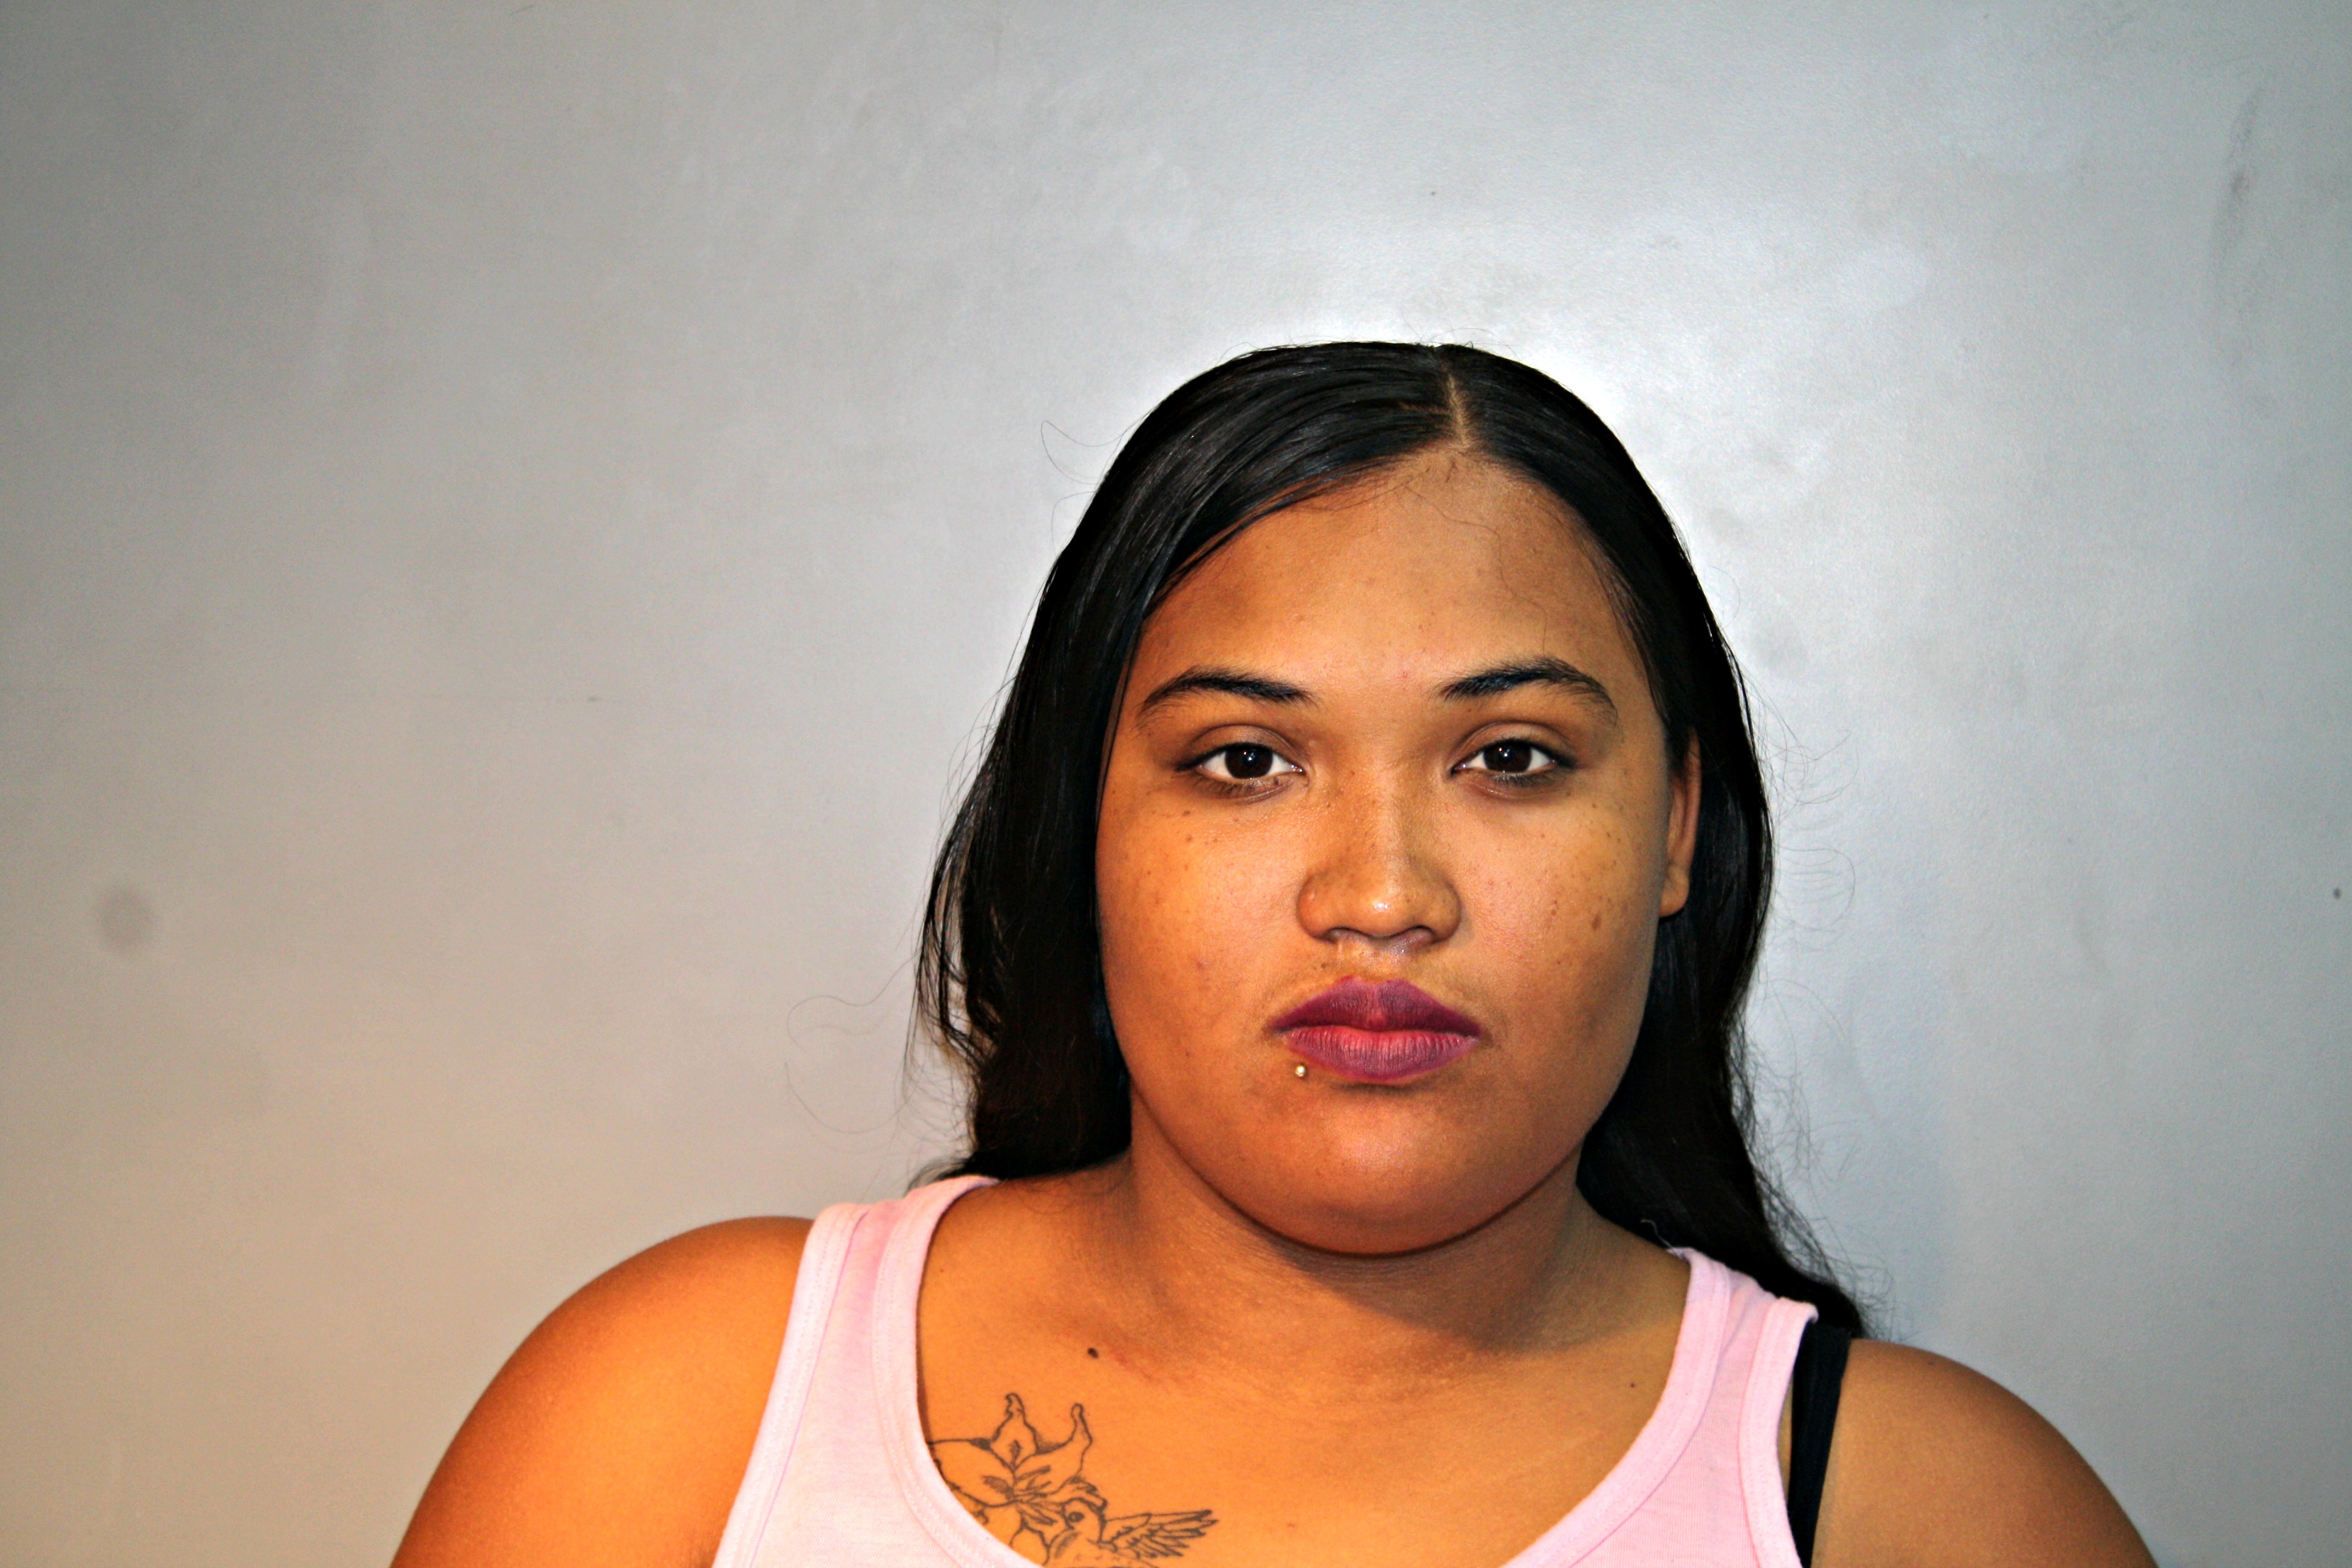 St. Croix Woman Arrested After Allegedly 'Slashing' Woman's Face In ...